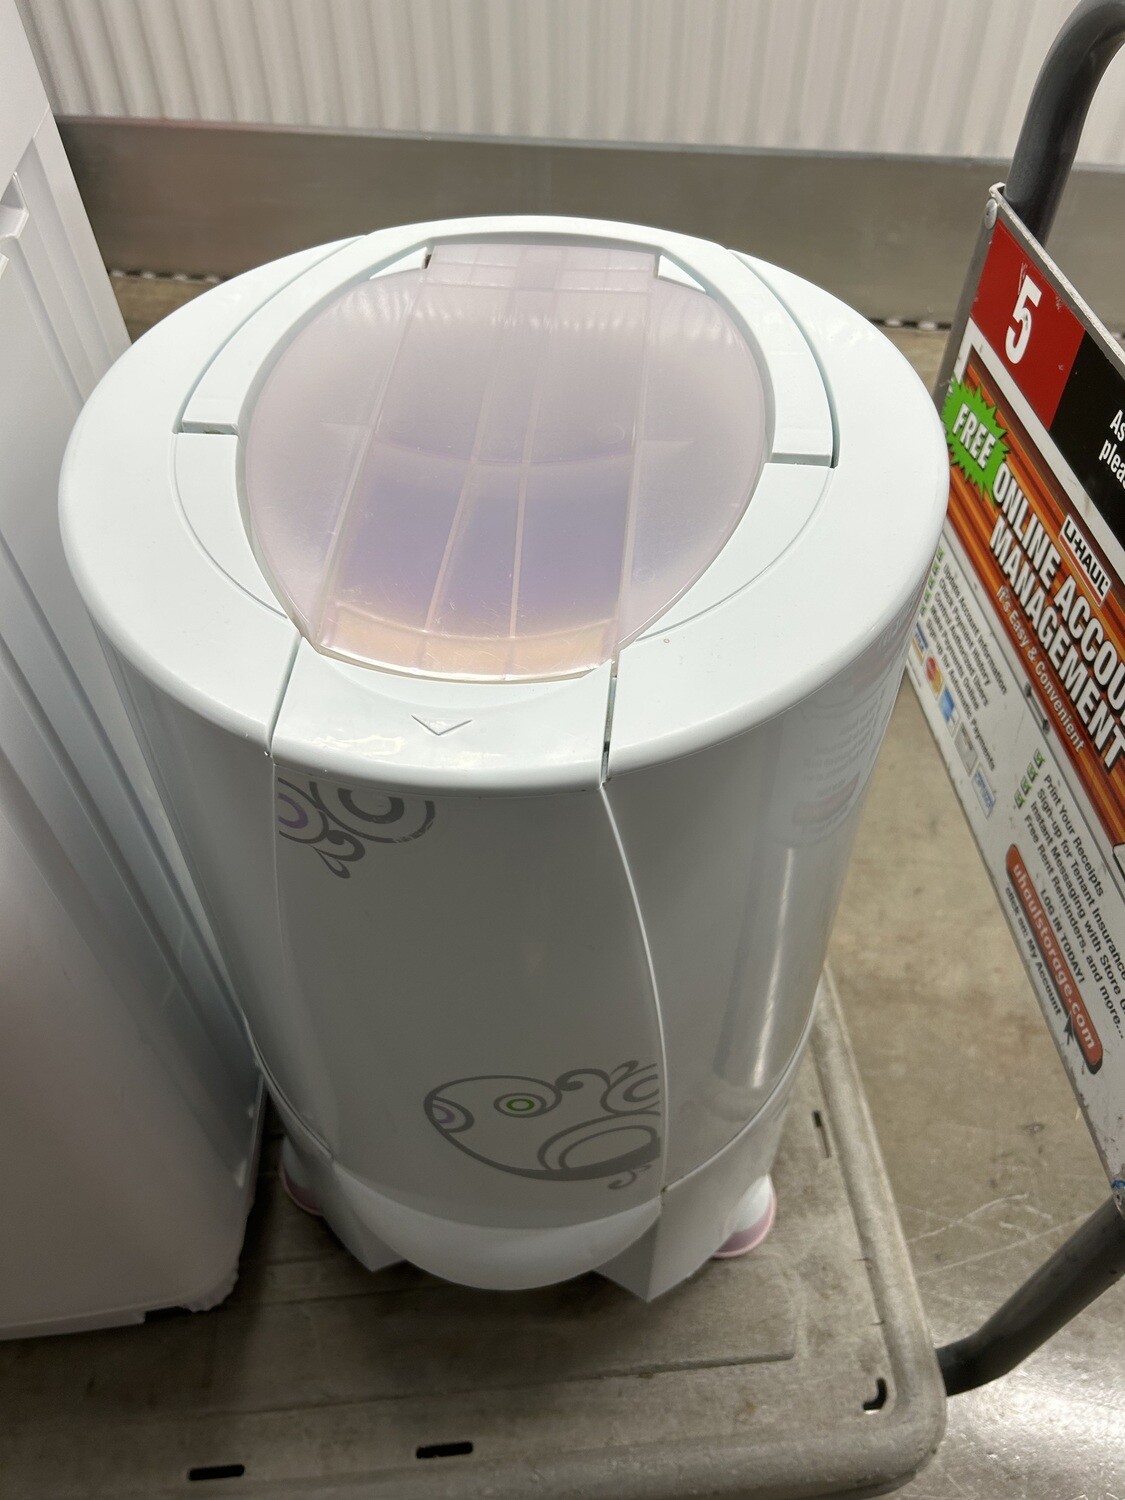 Portable Clothes Spin Dryer, The Laundry Alternative #2126